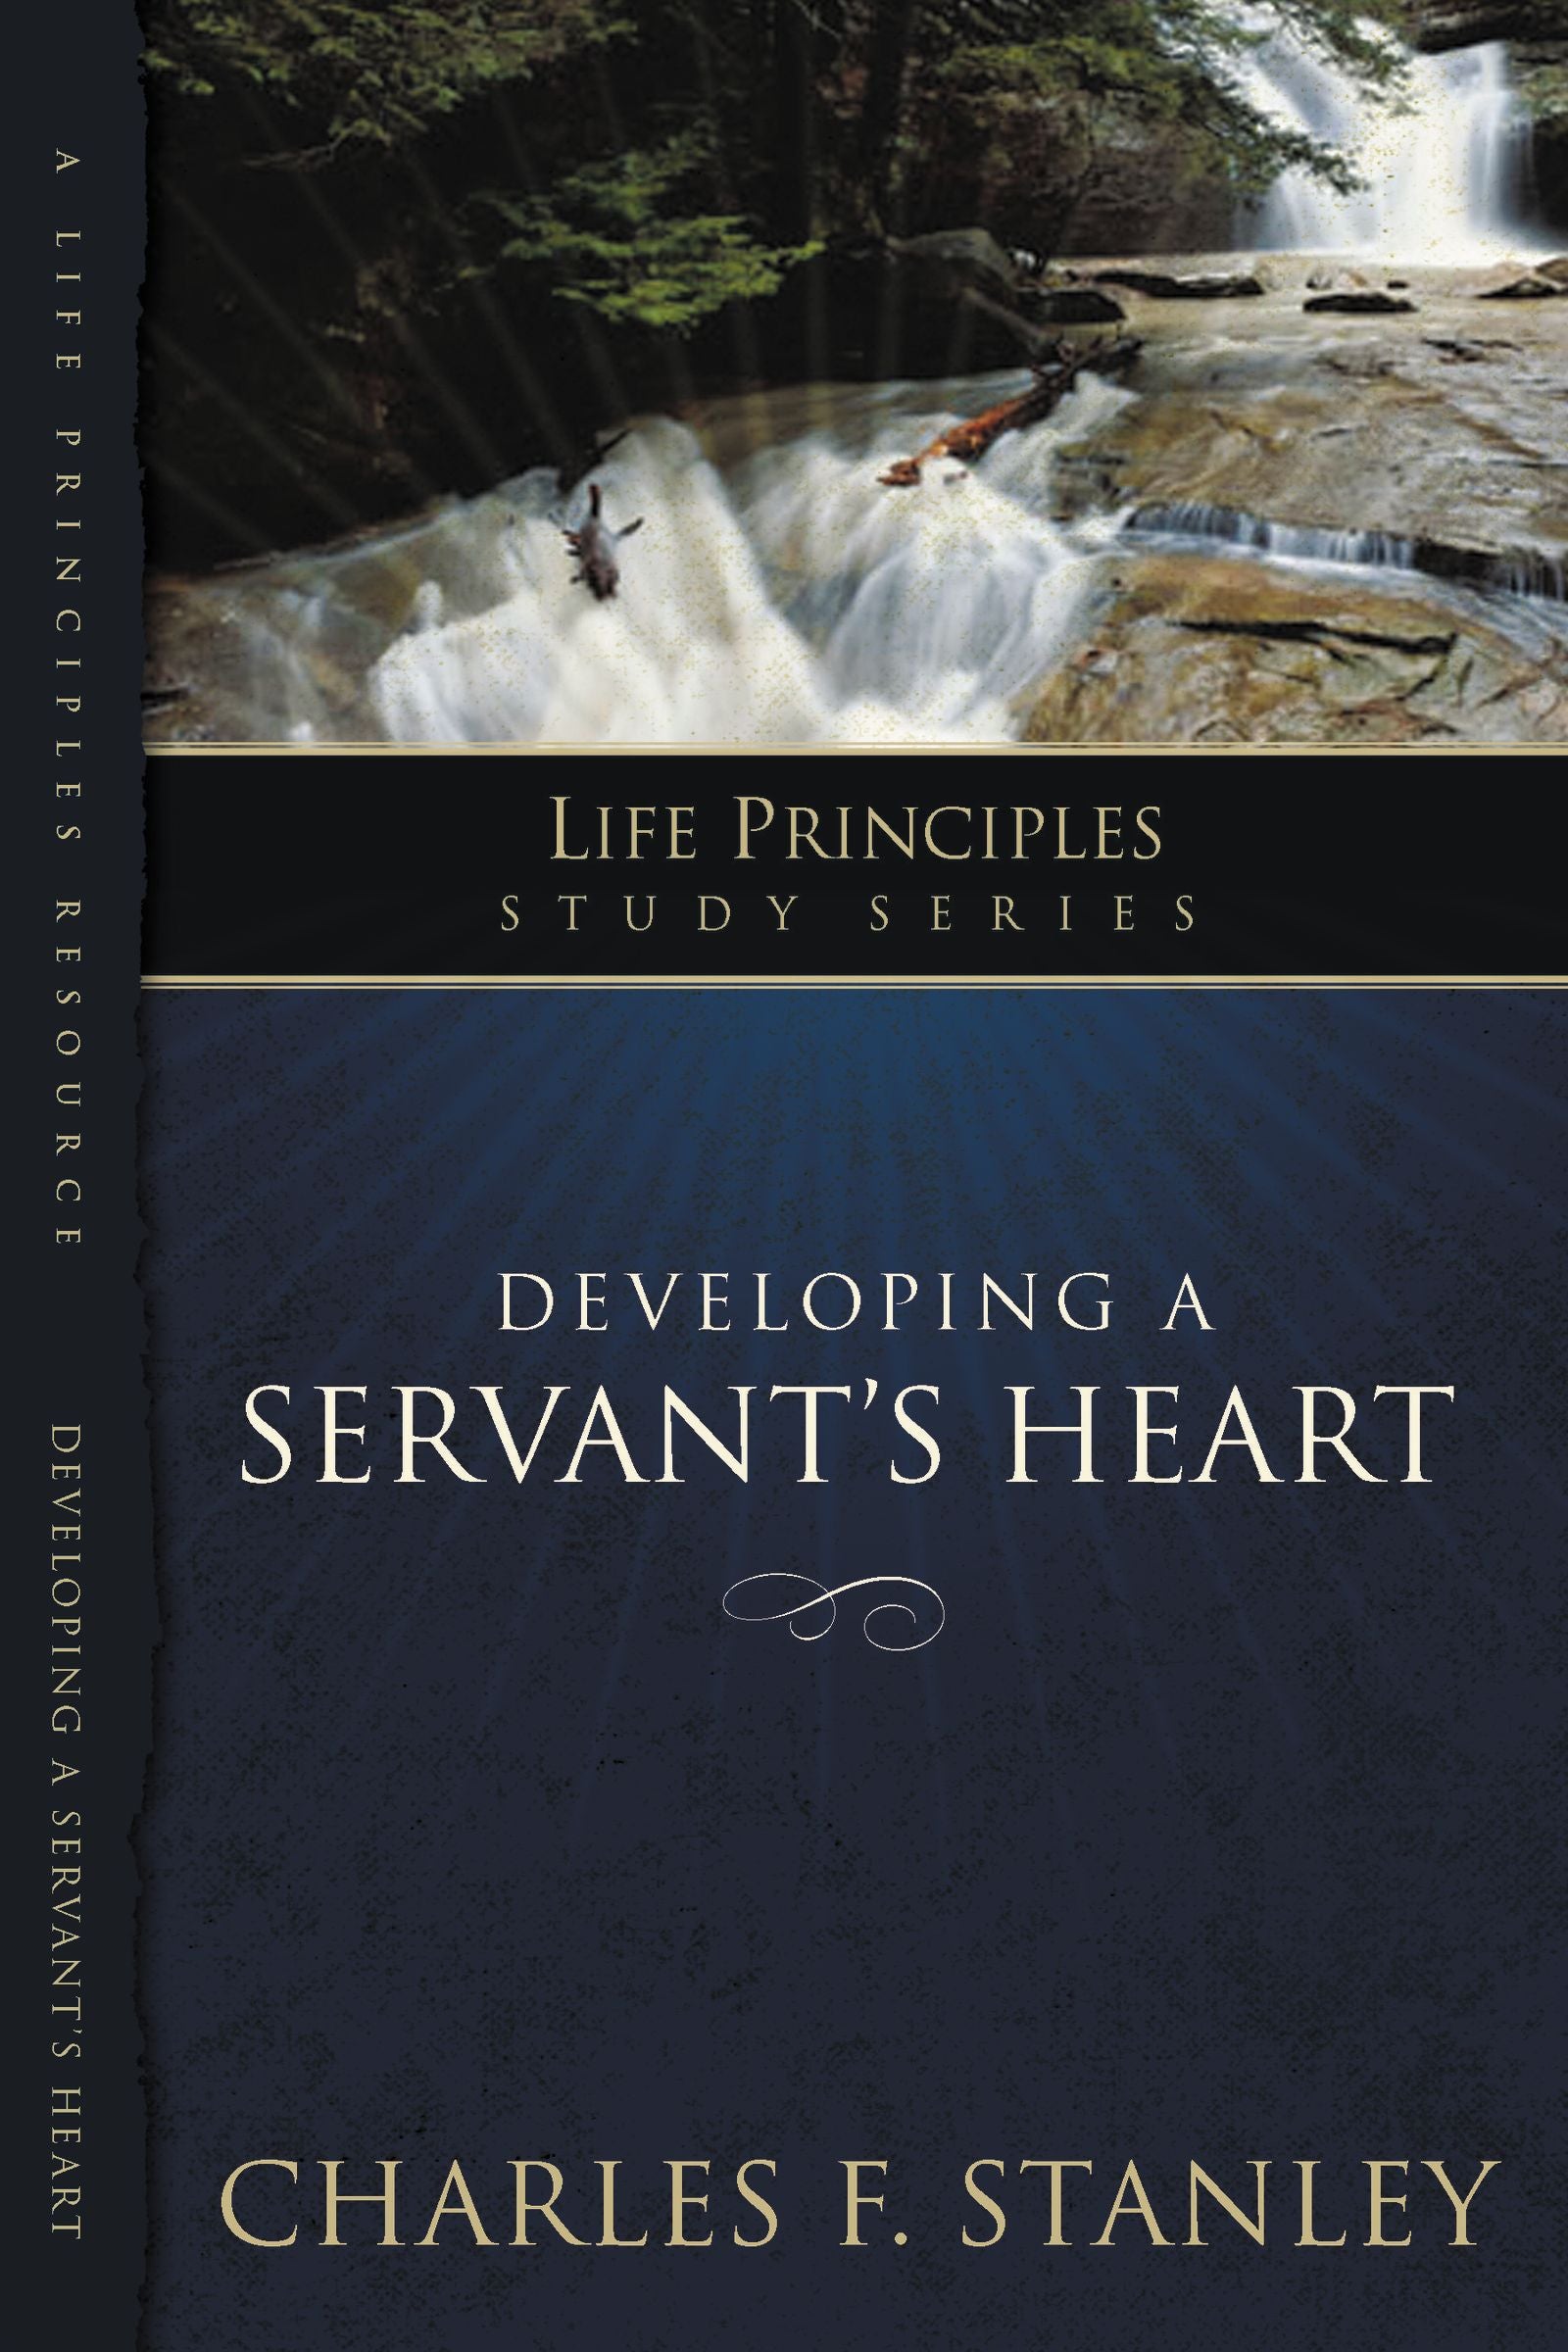 Image of Developing a Servant's Heart other